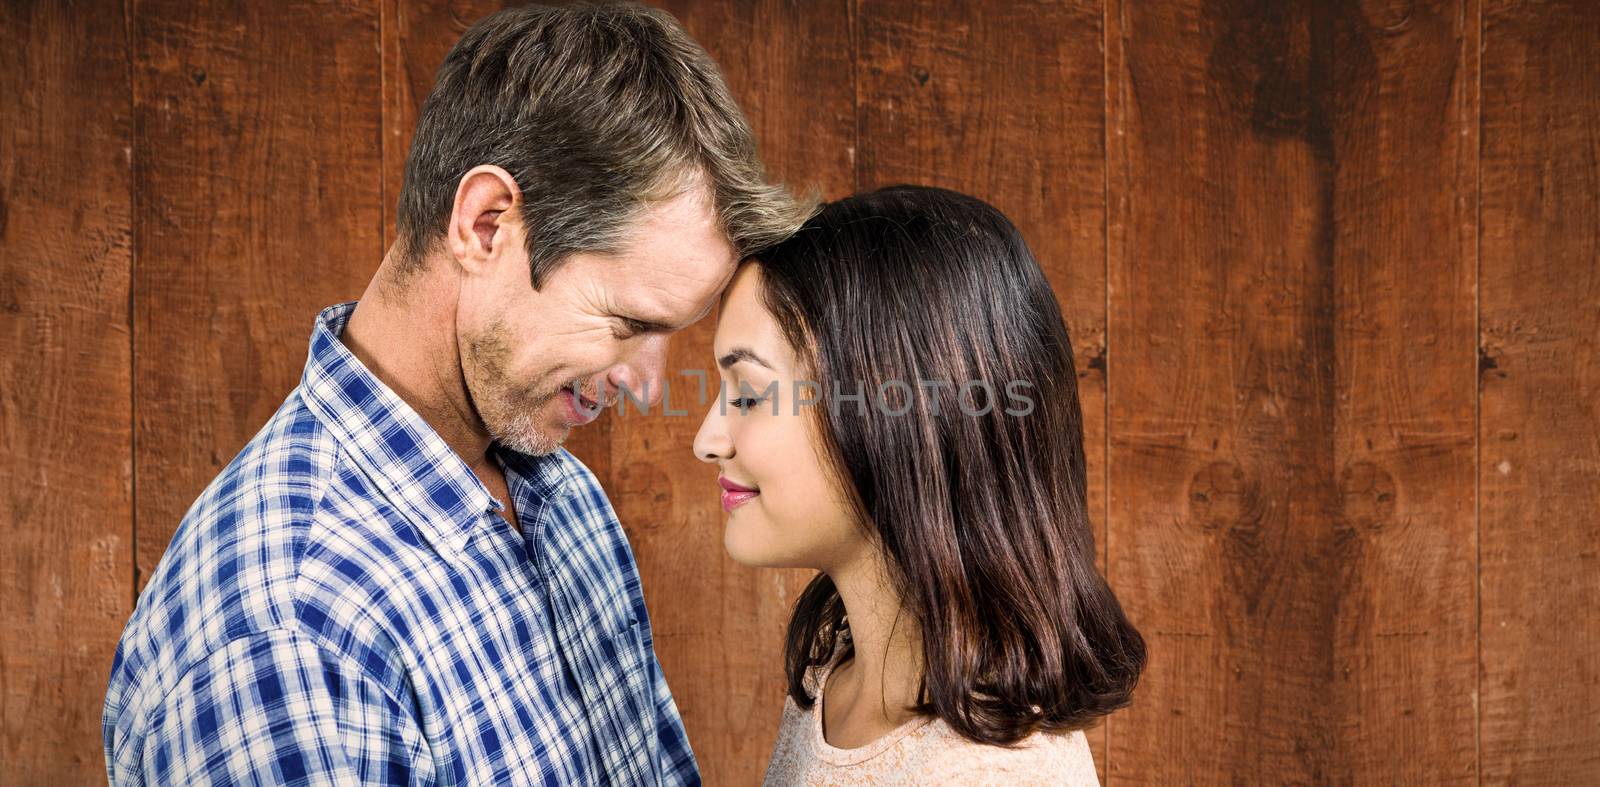 Close-up of romantic couple standing face to face against weathered oak floor boards background